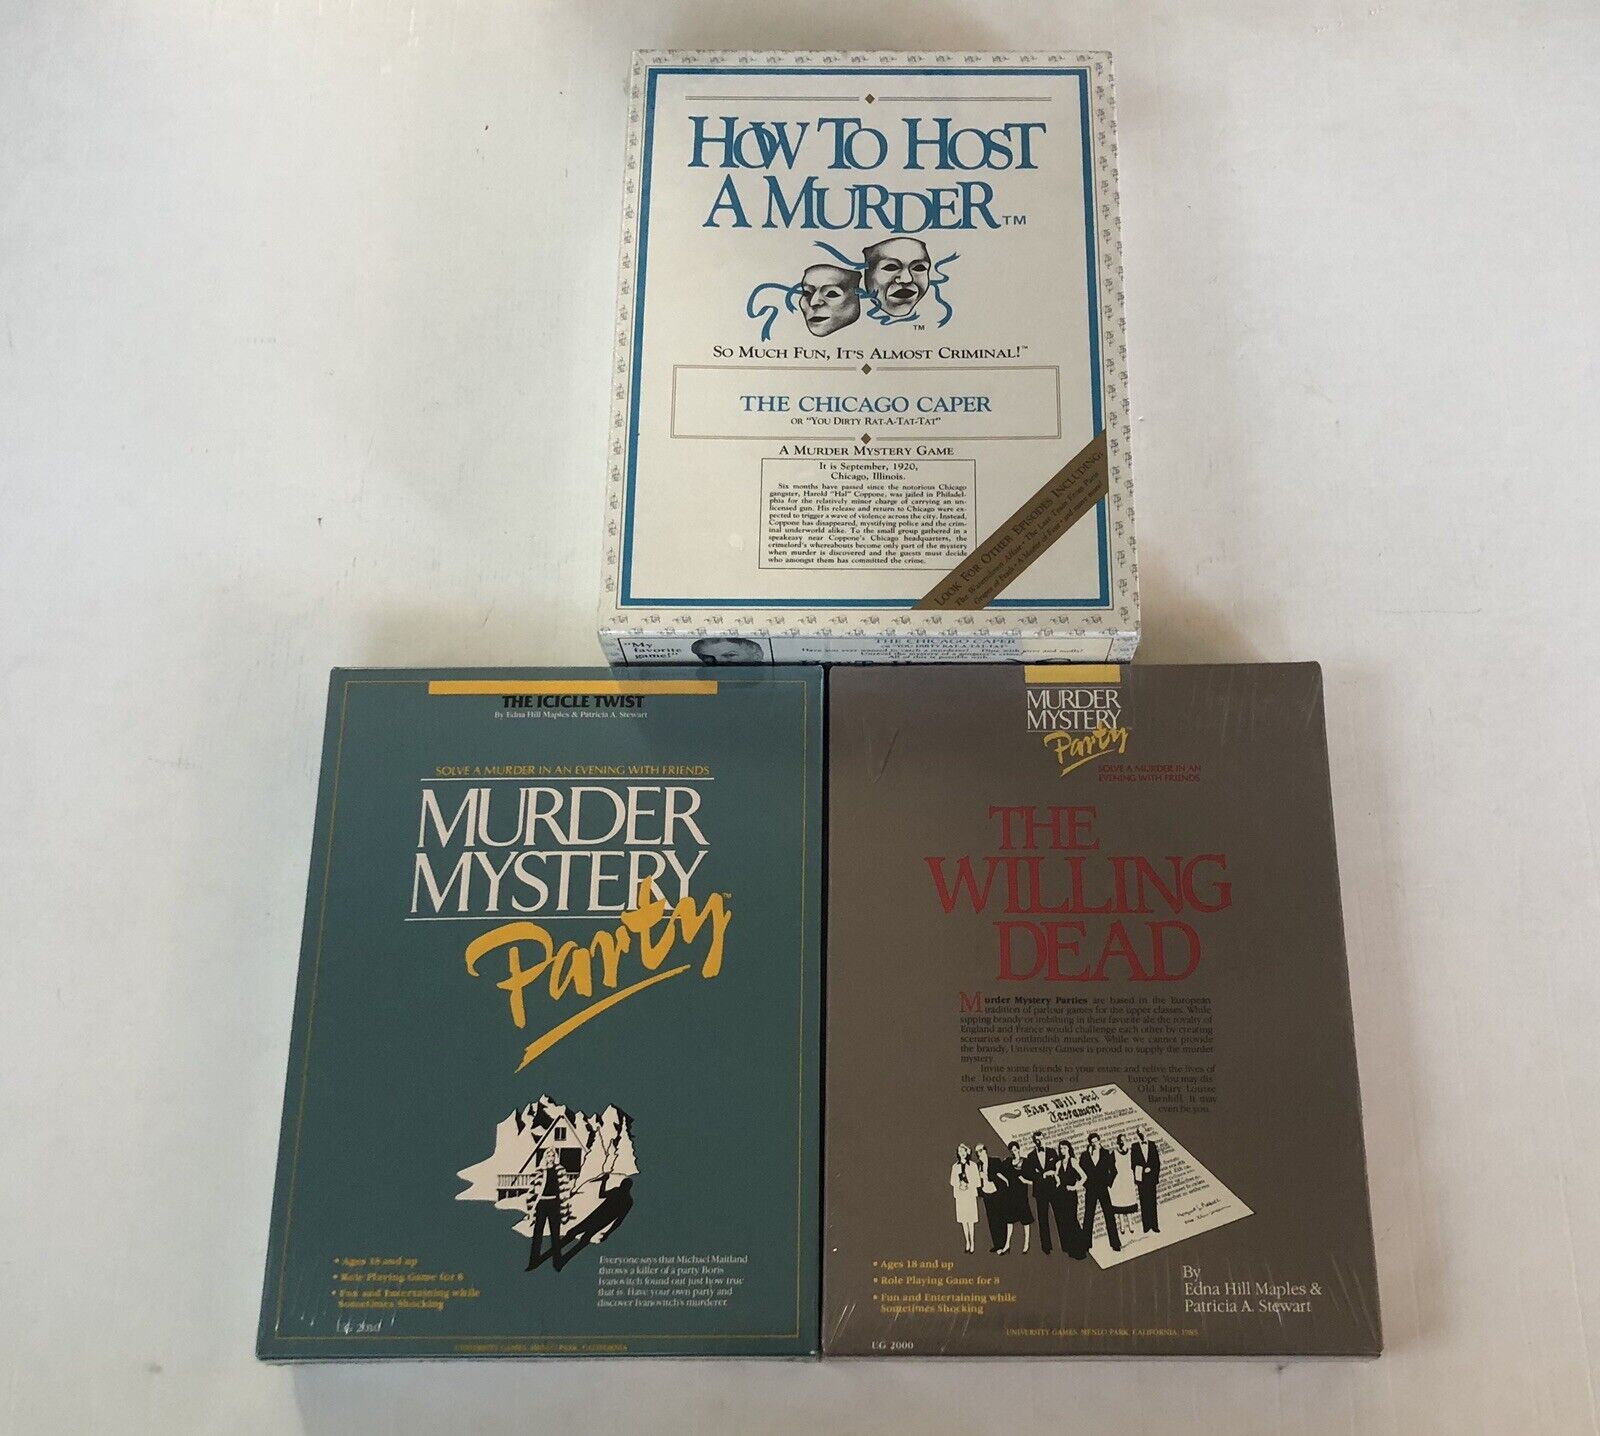 Vintage Game Lot How To Host A Murder The Willing Dead Murder Mystery Party 80s